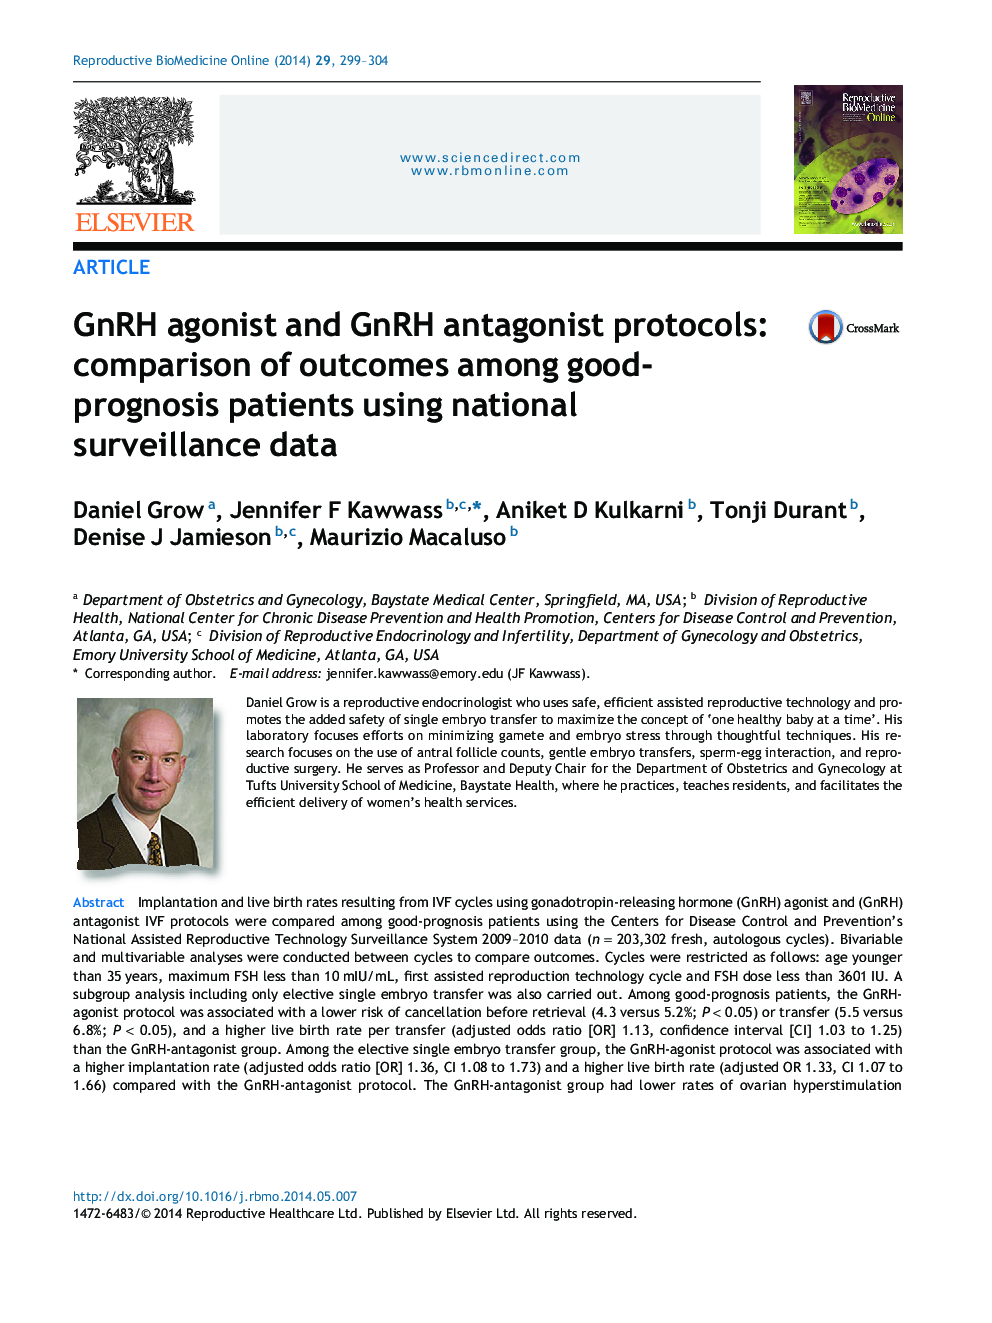 GnRH agonist and GnRH antagonist protocols: comparison of outcomes among good-prognosis patients using national surveillance data 